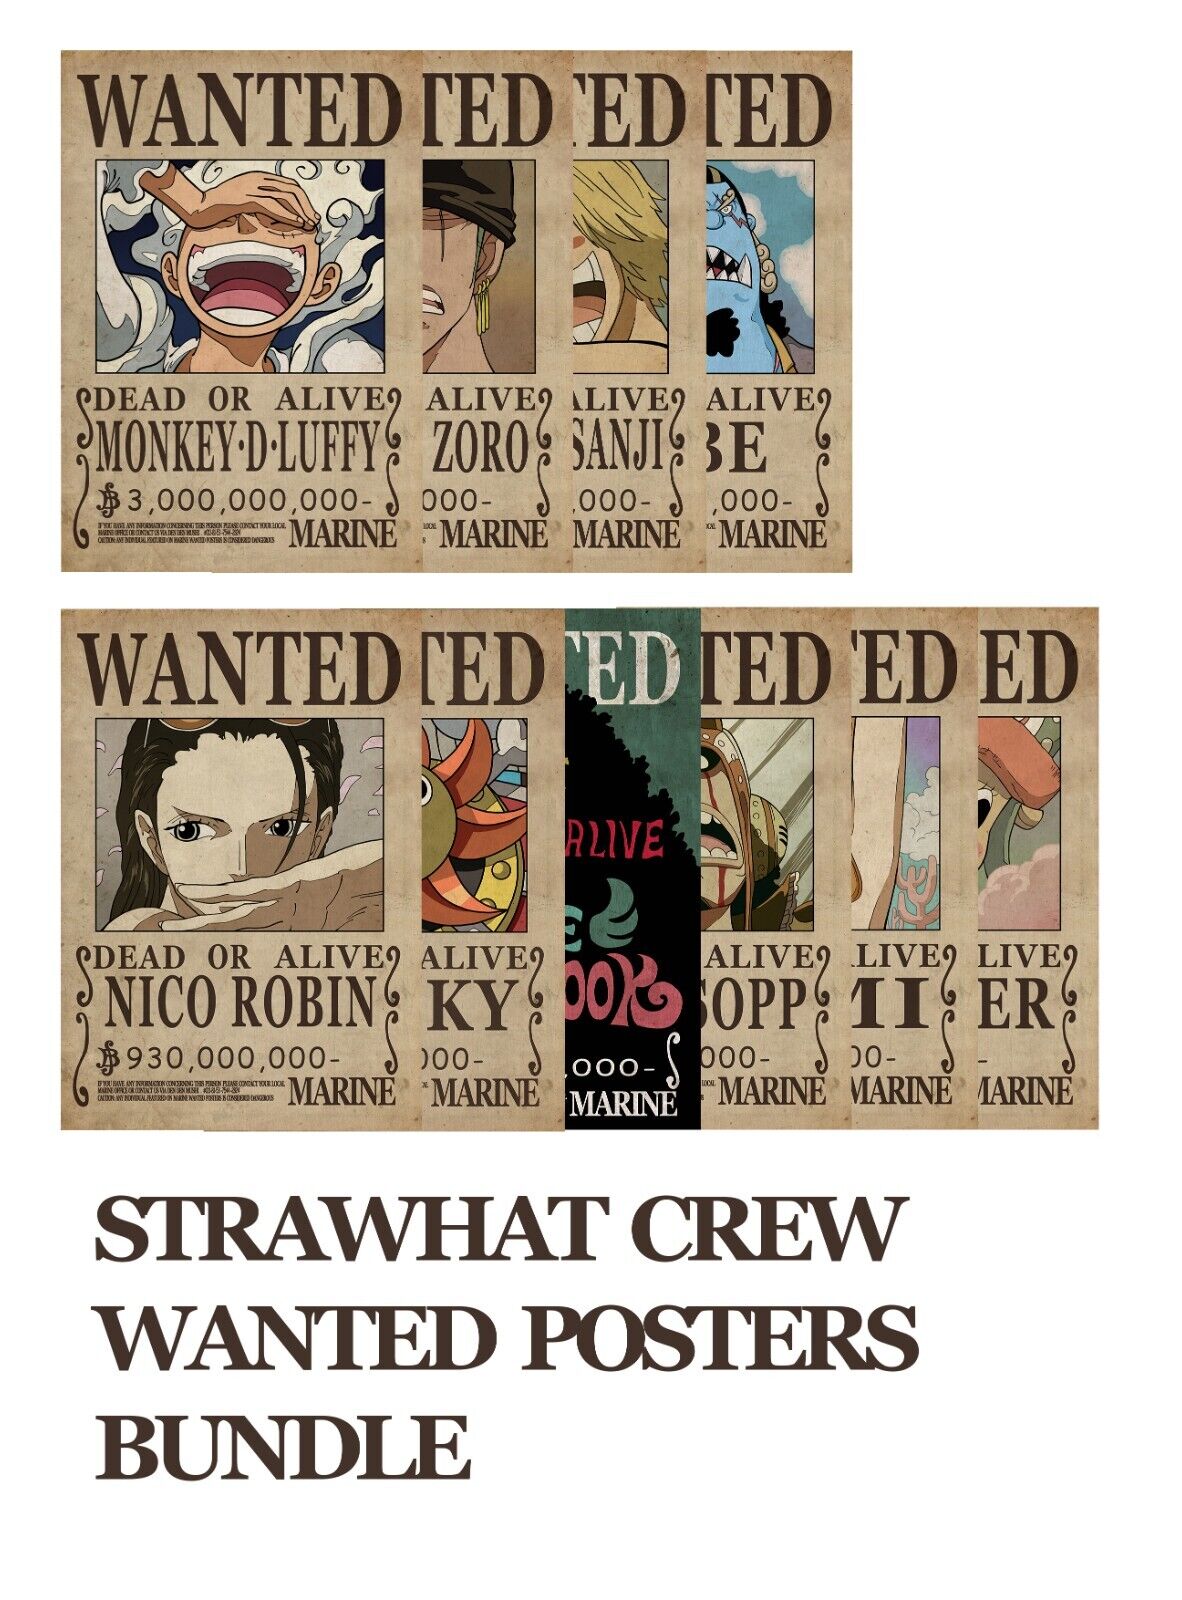 One Piece Wanted Poster - Strawhat Crew Bundle